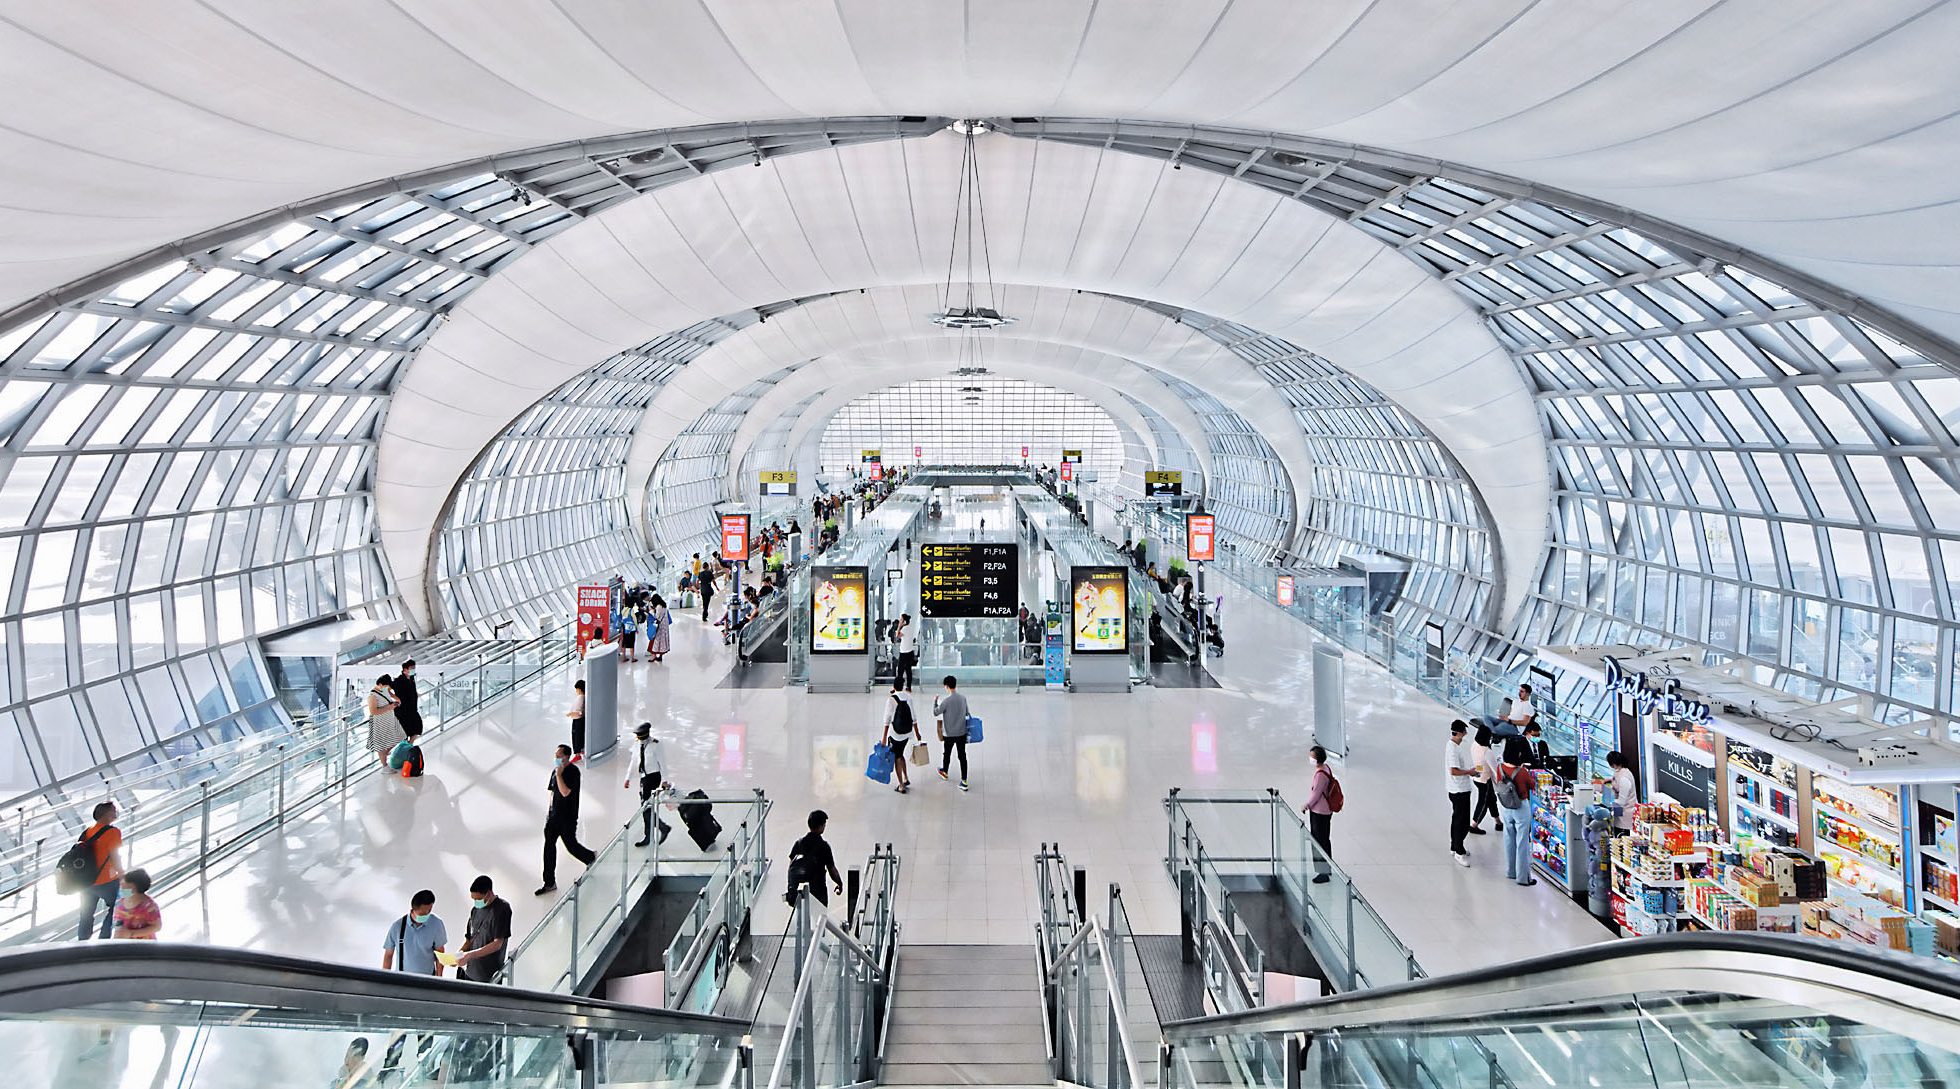 Paul Dingman photographs airports and transportation for architects and airport marketing communications.